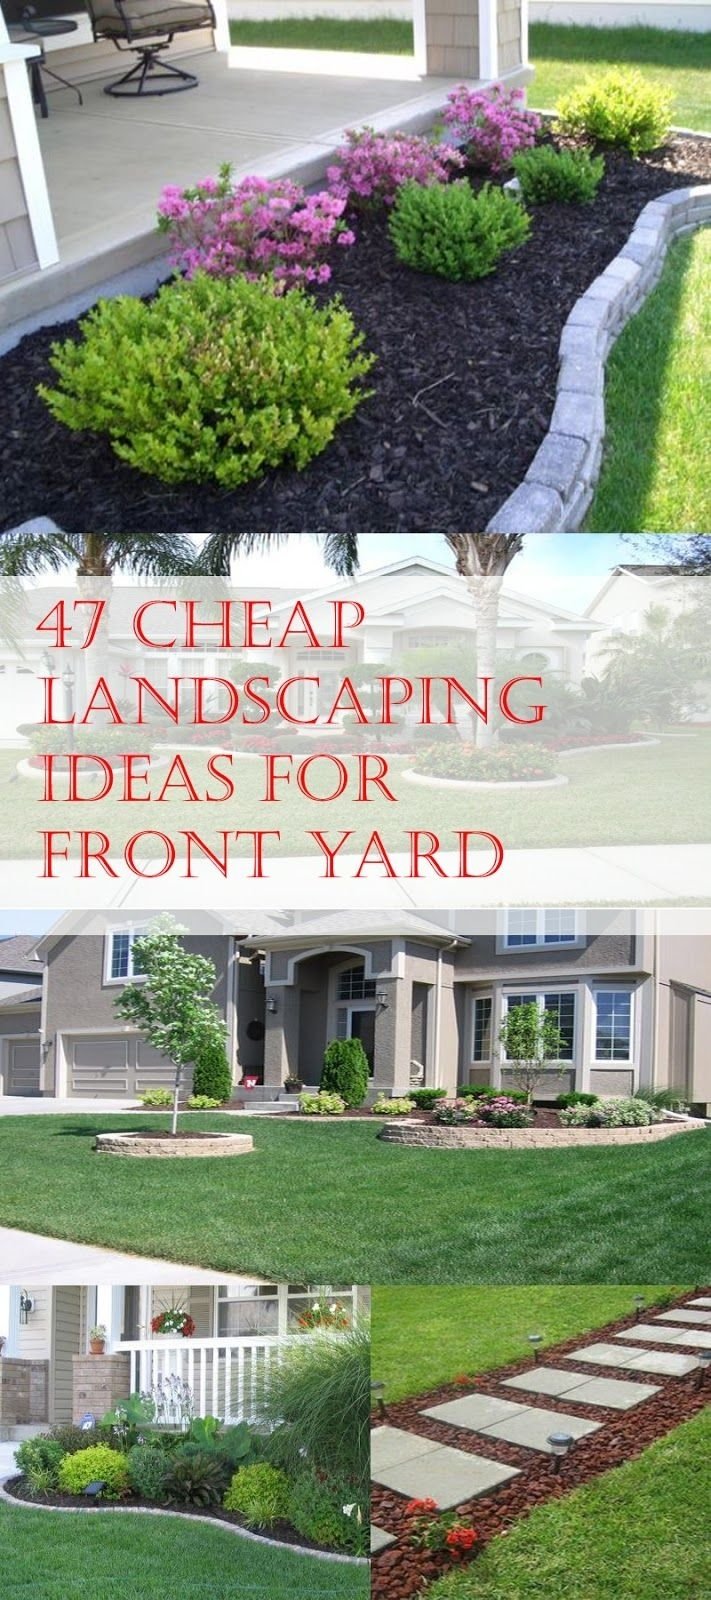 10 Pretty Small Front Yard Landscaping Ideas On A Budget 47 cheap landscaping ideas for front yard cheap landscaping ideas 2 2022